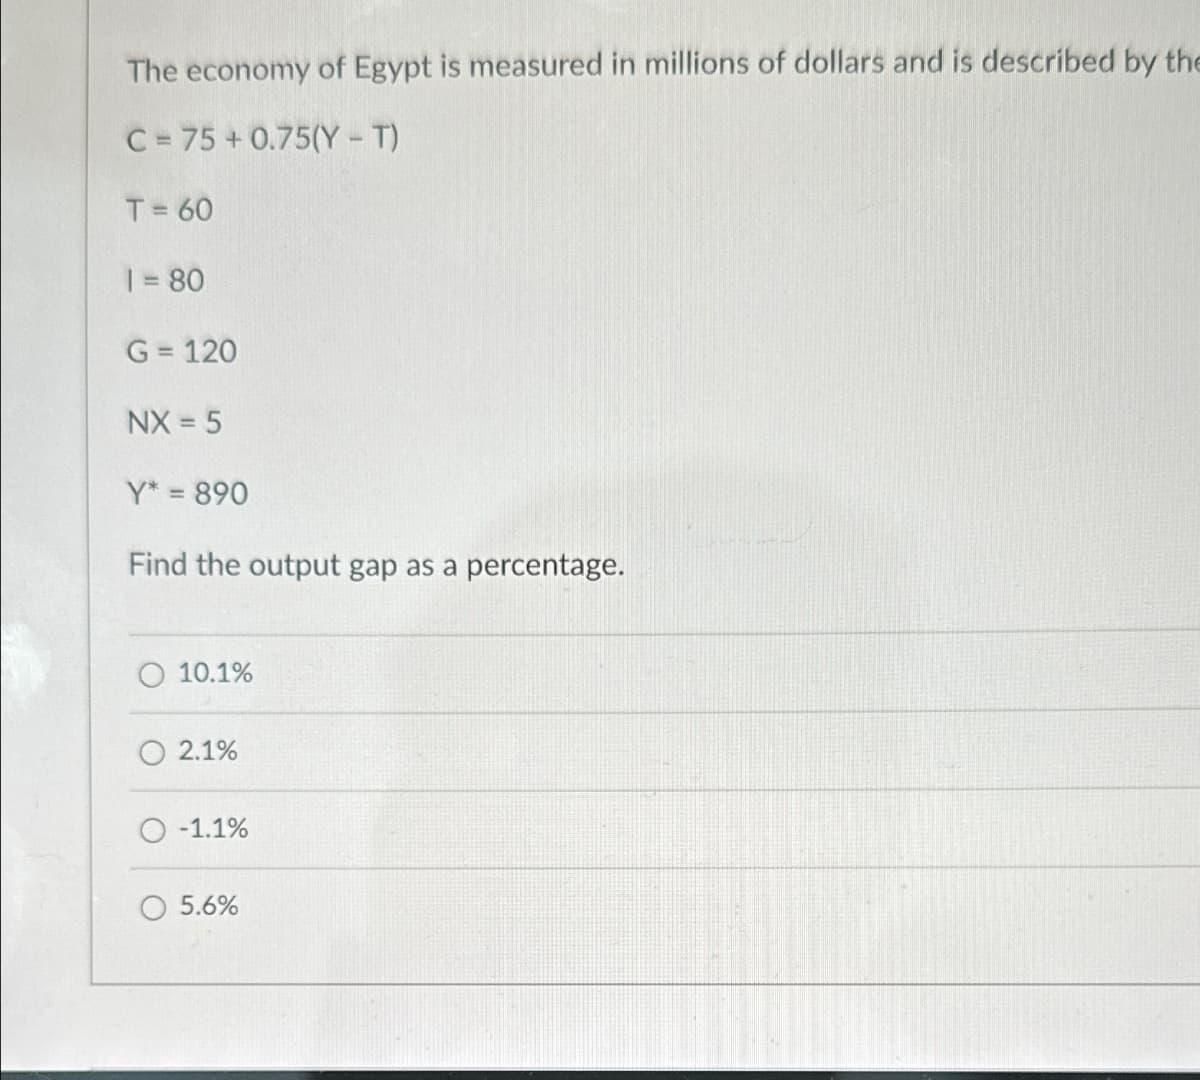 The economy of Egypt is measured in millions of dollars and is described by the
C=75+0.75(Y - T)
T= 60
1 = 80
G = 120
NX=5
Y* = 890
Find the output gap as a percentage.
10.1%
2.1%
O-1.1%
5.6%